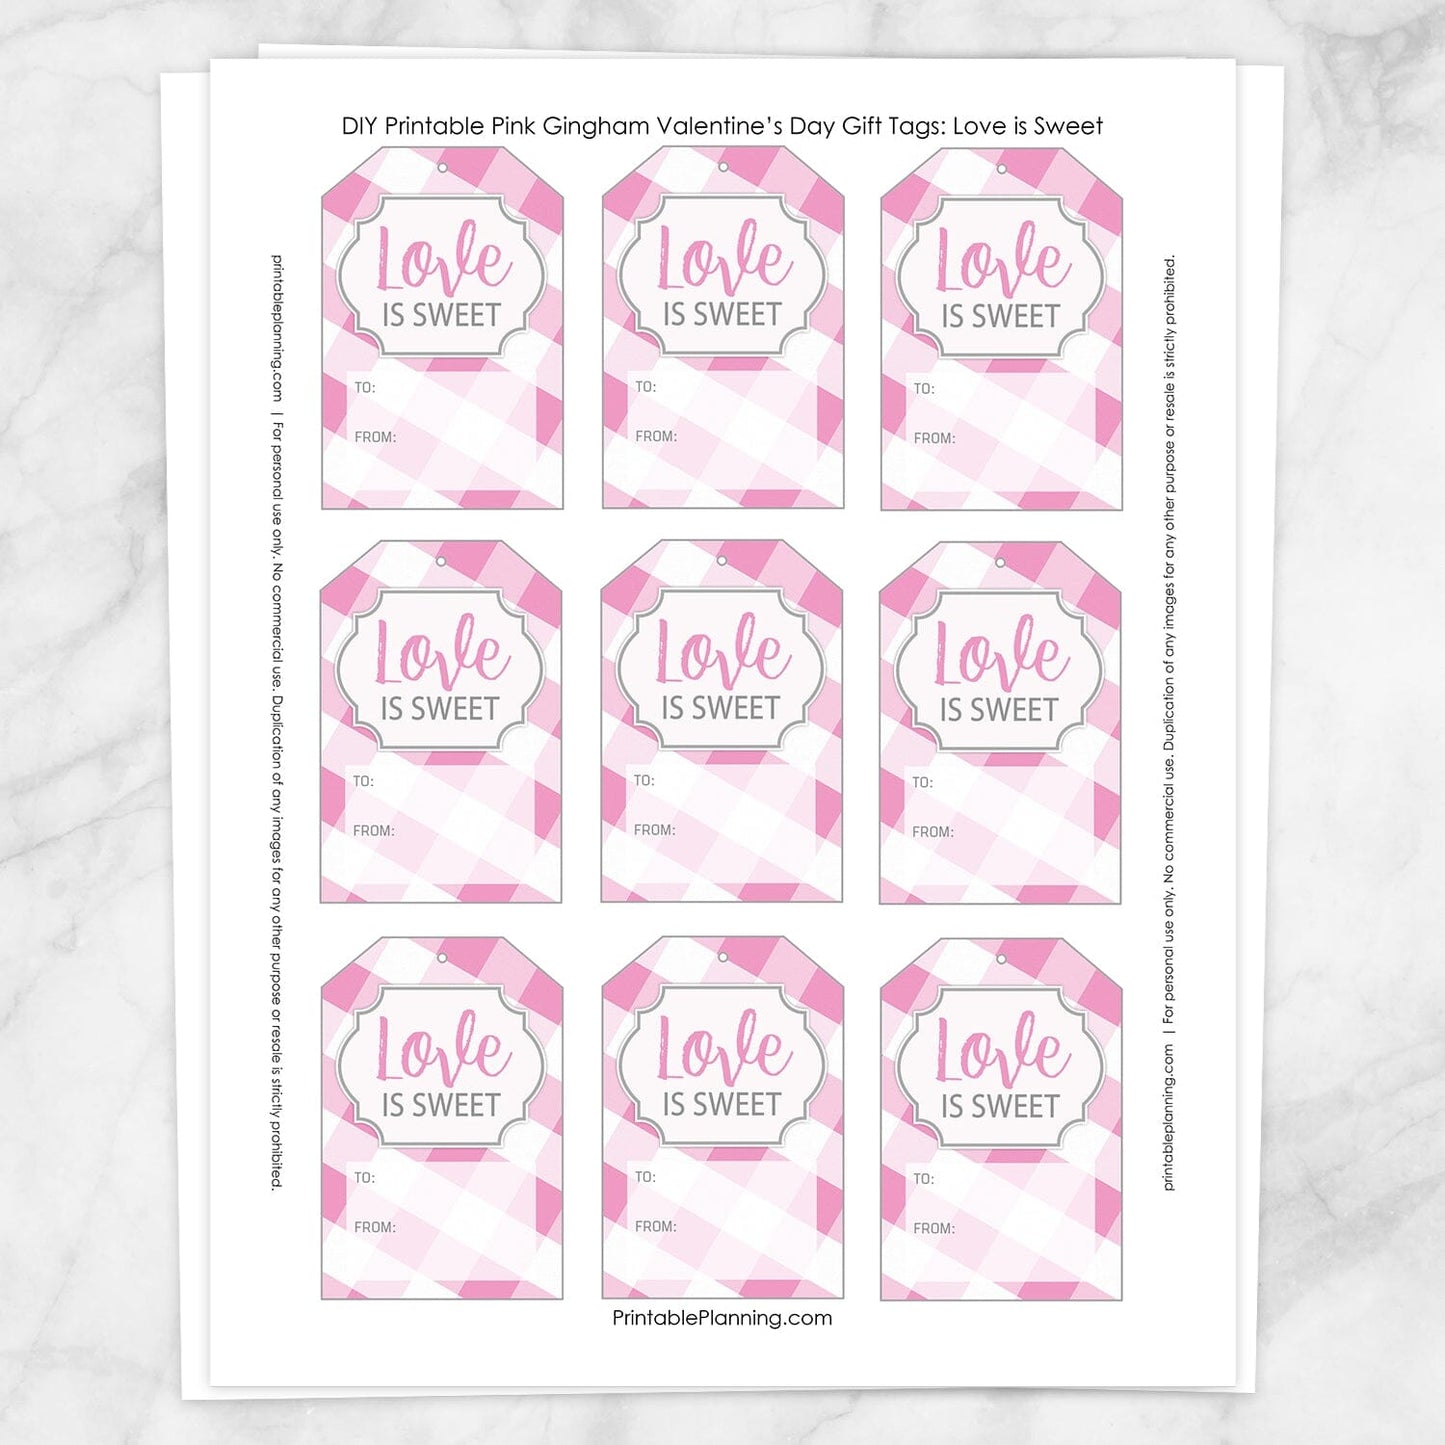 Printable Pink Gingham Love is Sweet Gift Tags at Printable Planning. Sheet of 9 gift tags.